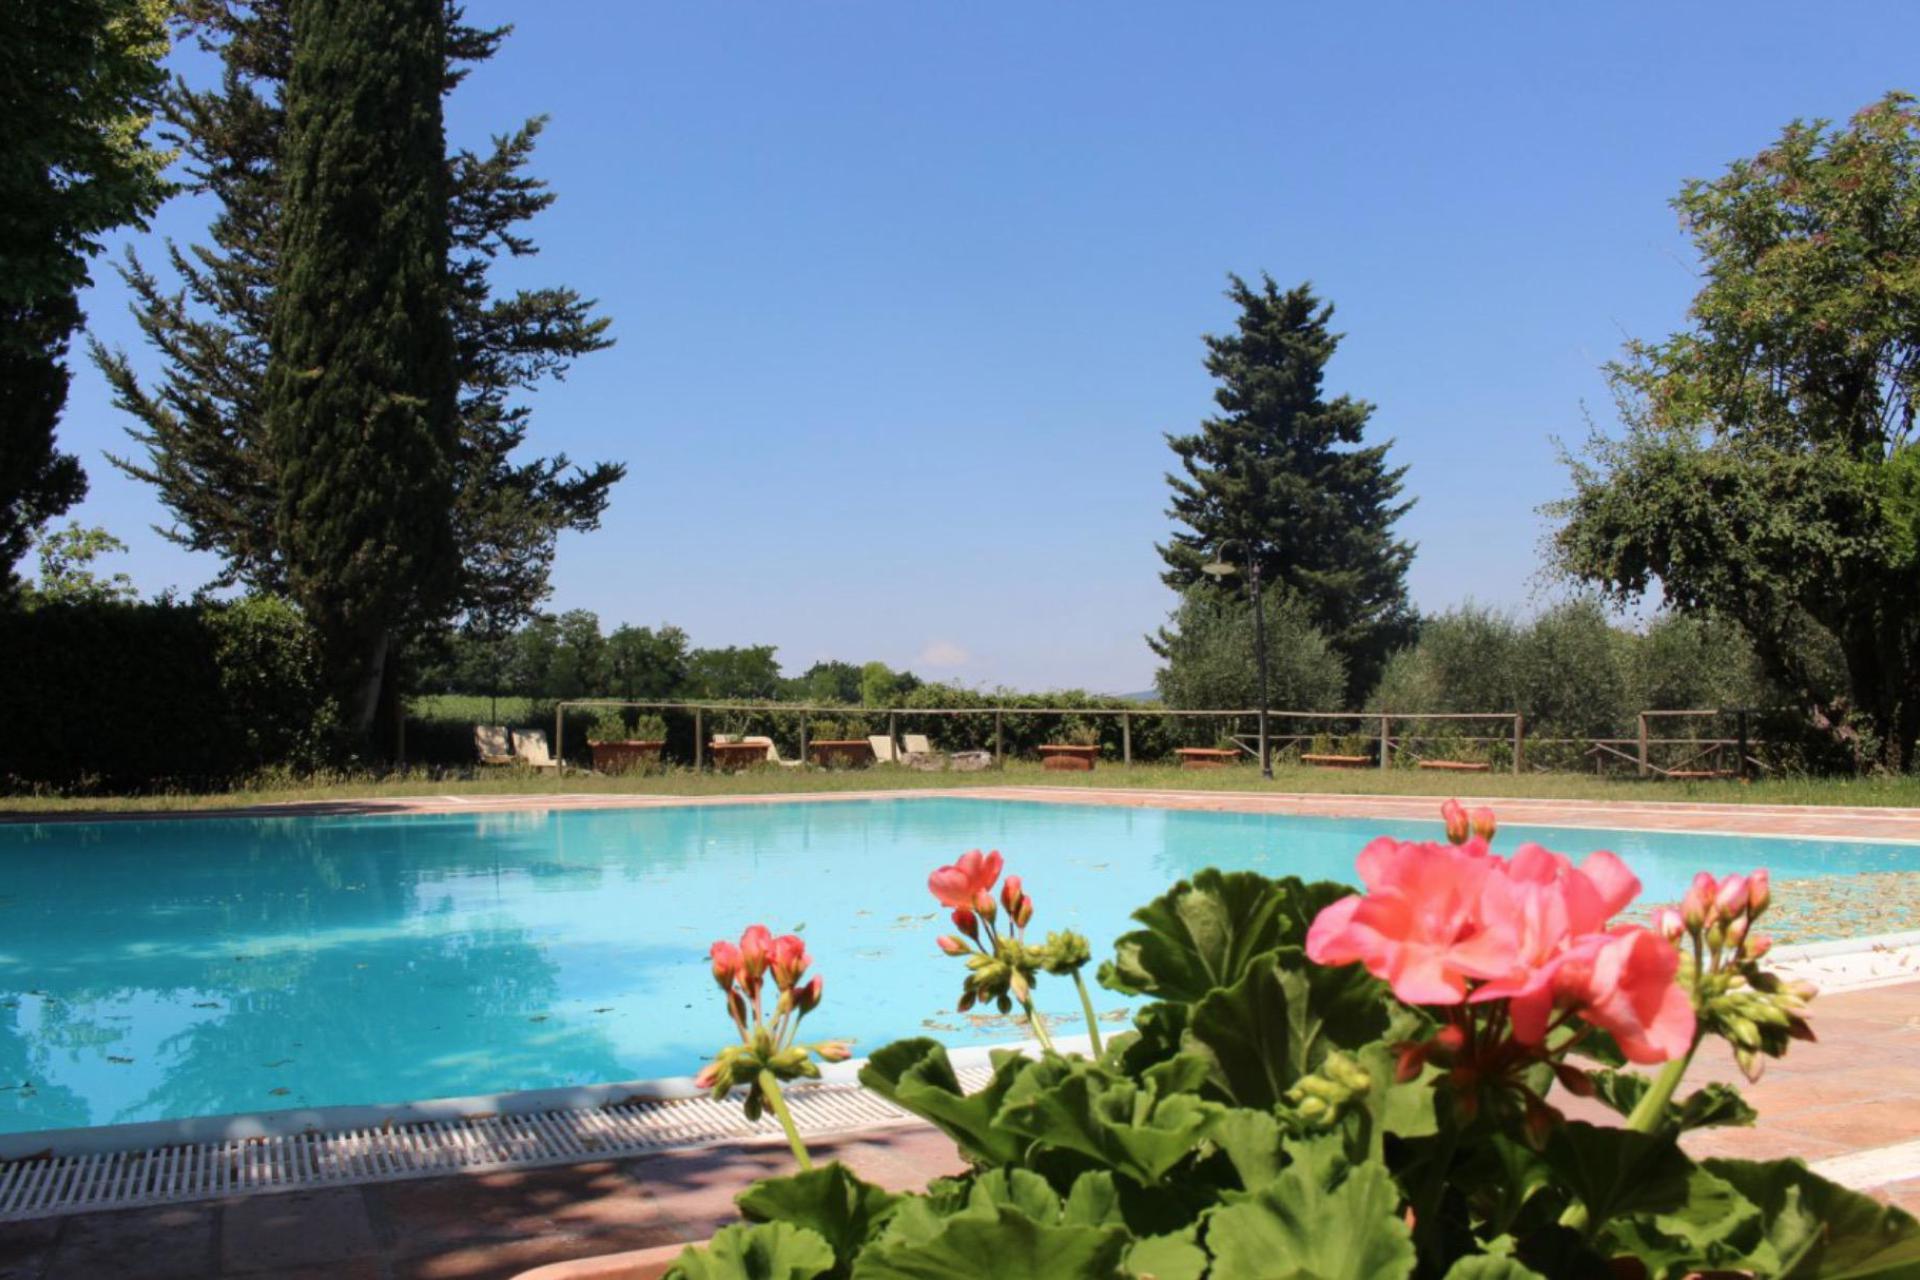 Agriturismo Tuscany Characteristic agriturismo centrally located in Tuscany